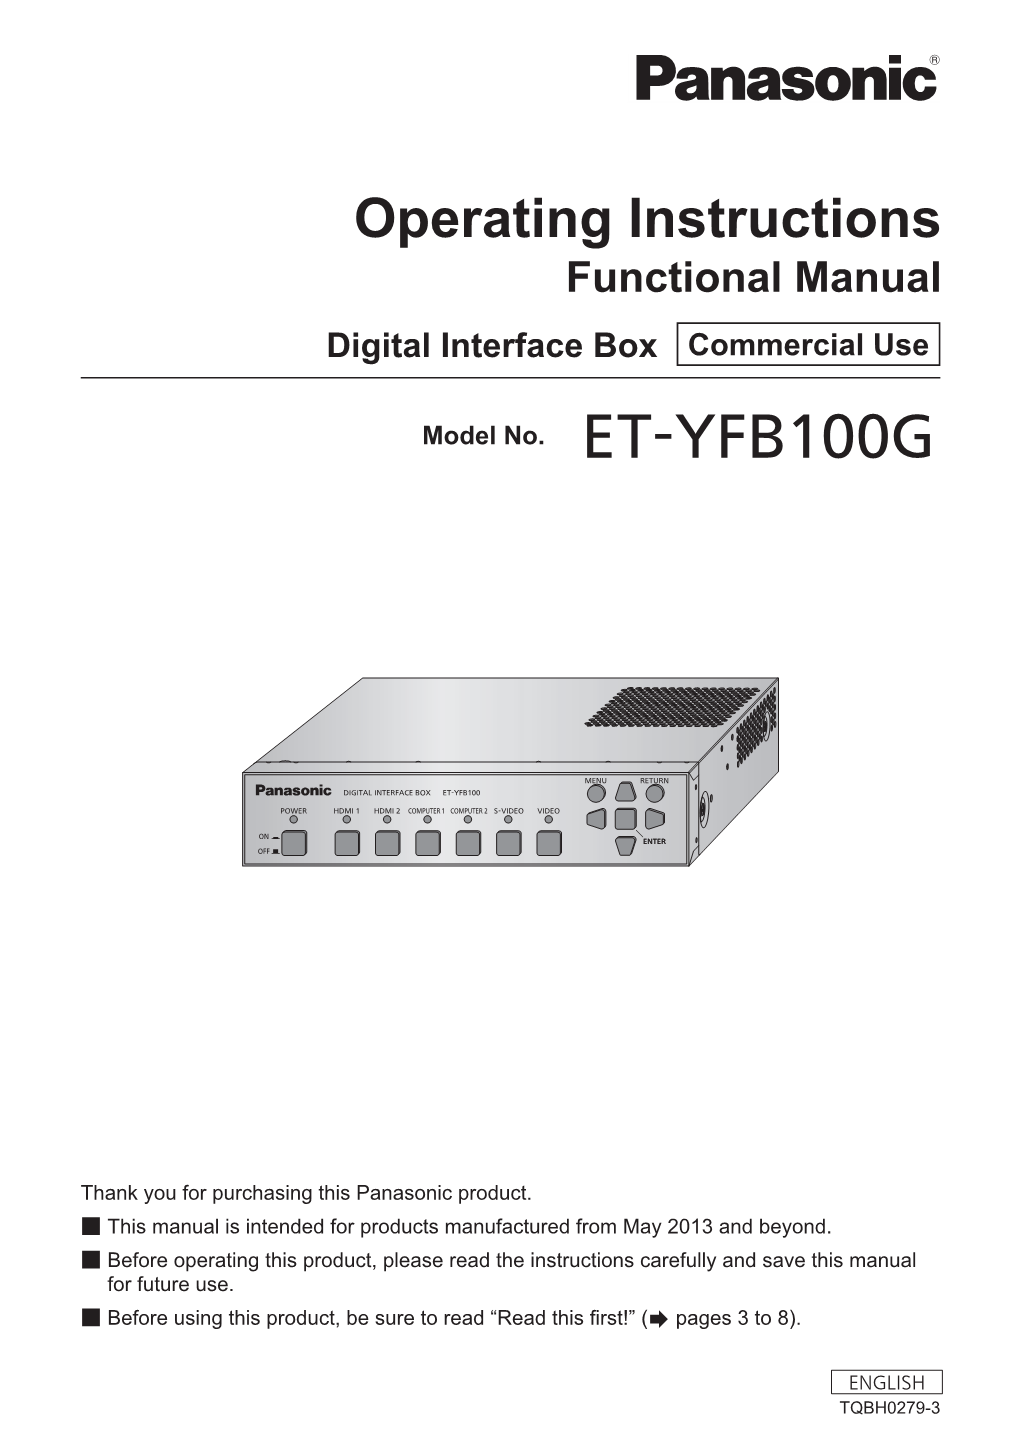 Operating Instructions Functional Manual Digital Interface Box Commercial Use